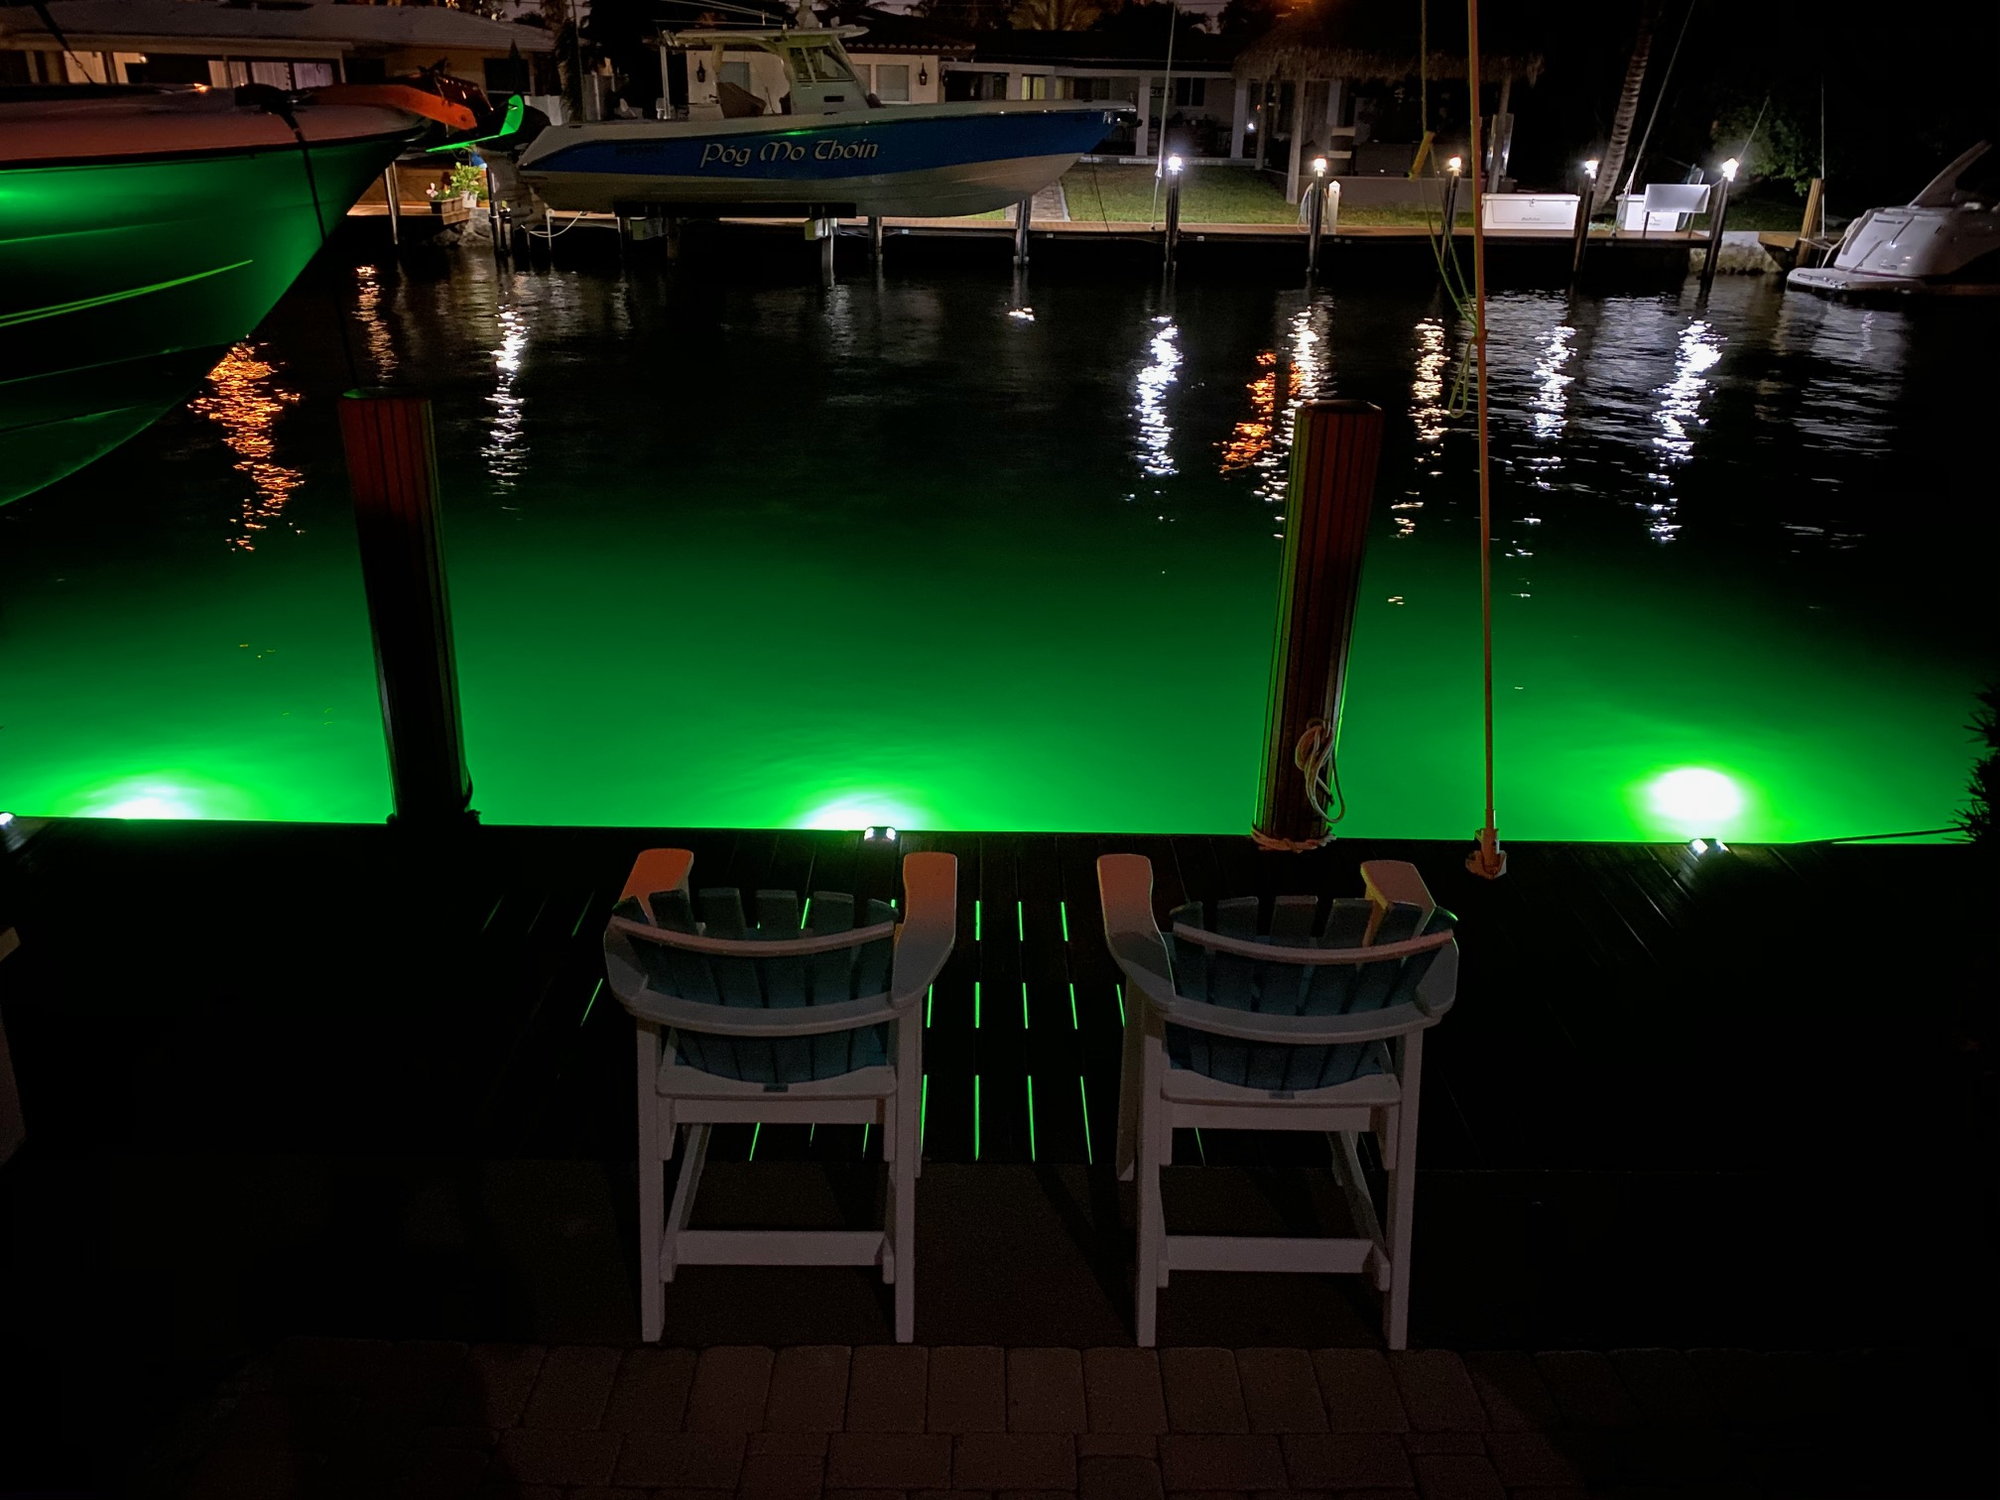 Best Selling Submersible LED Lights for Fishing, Boats, and Marinas